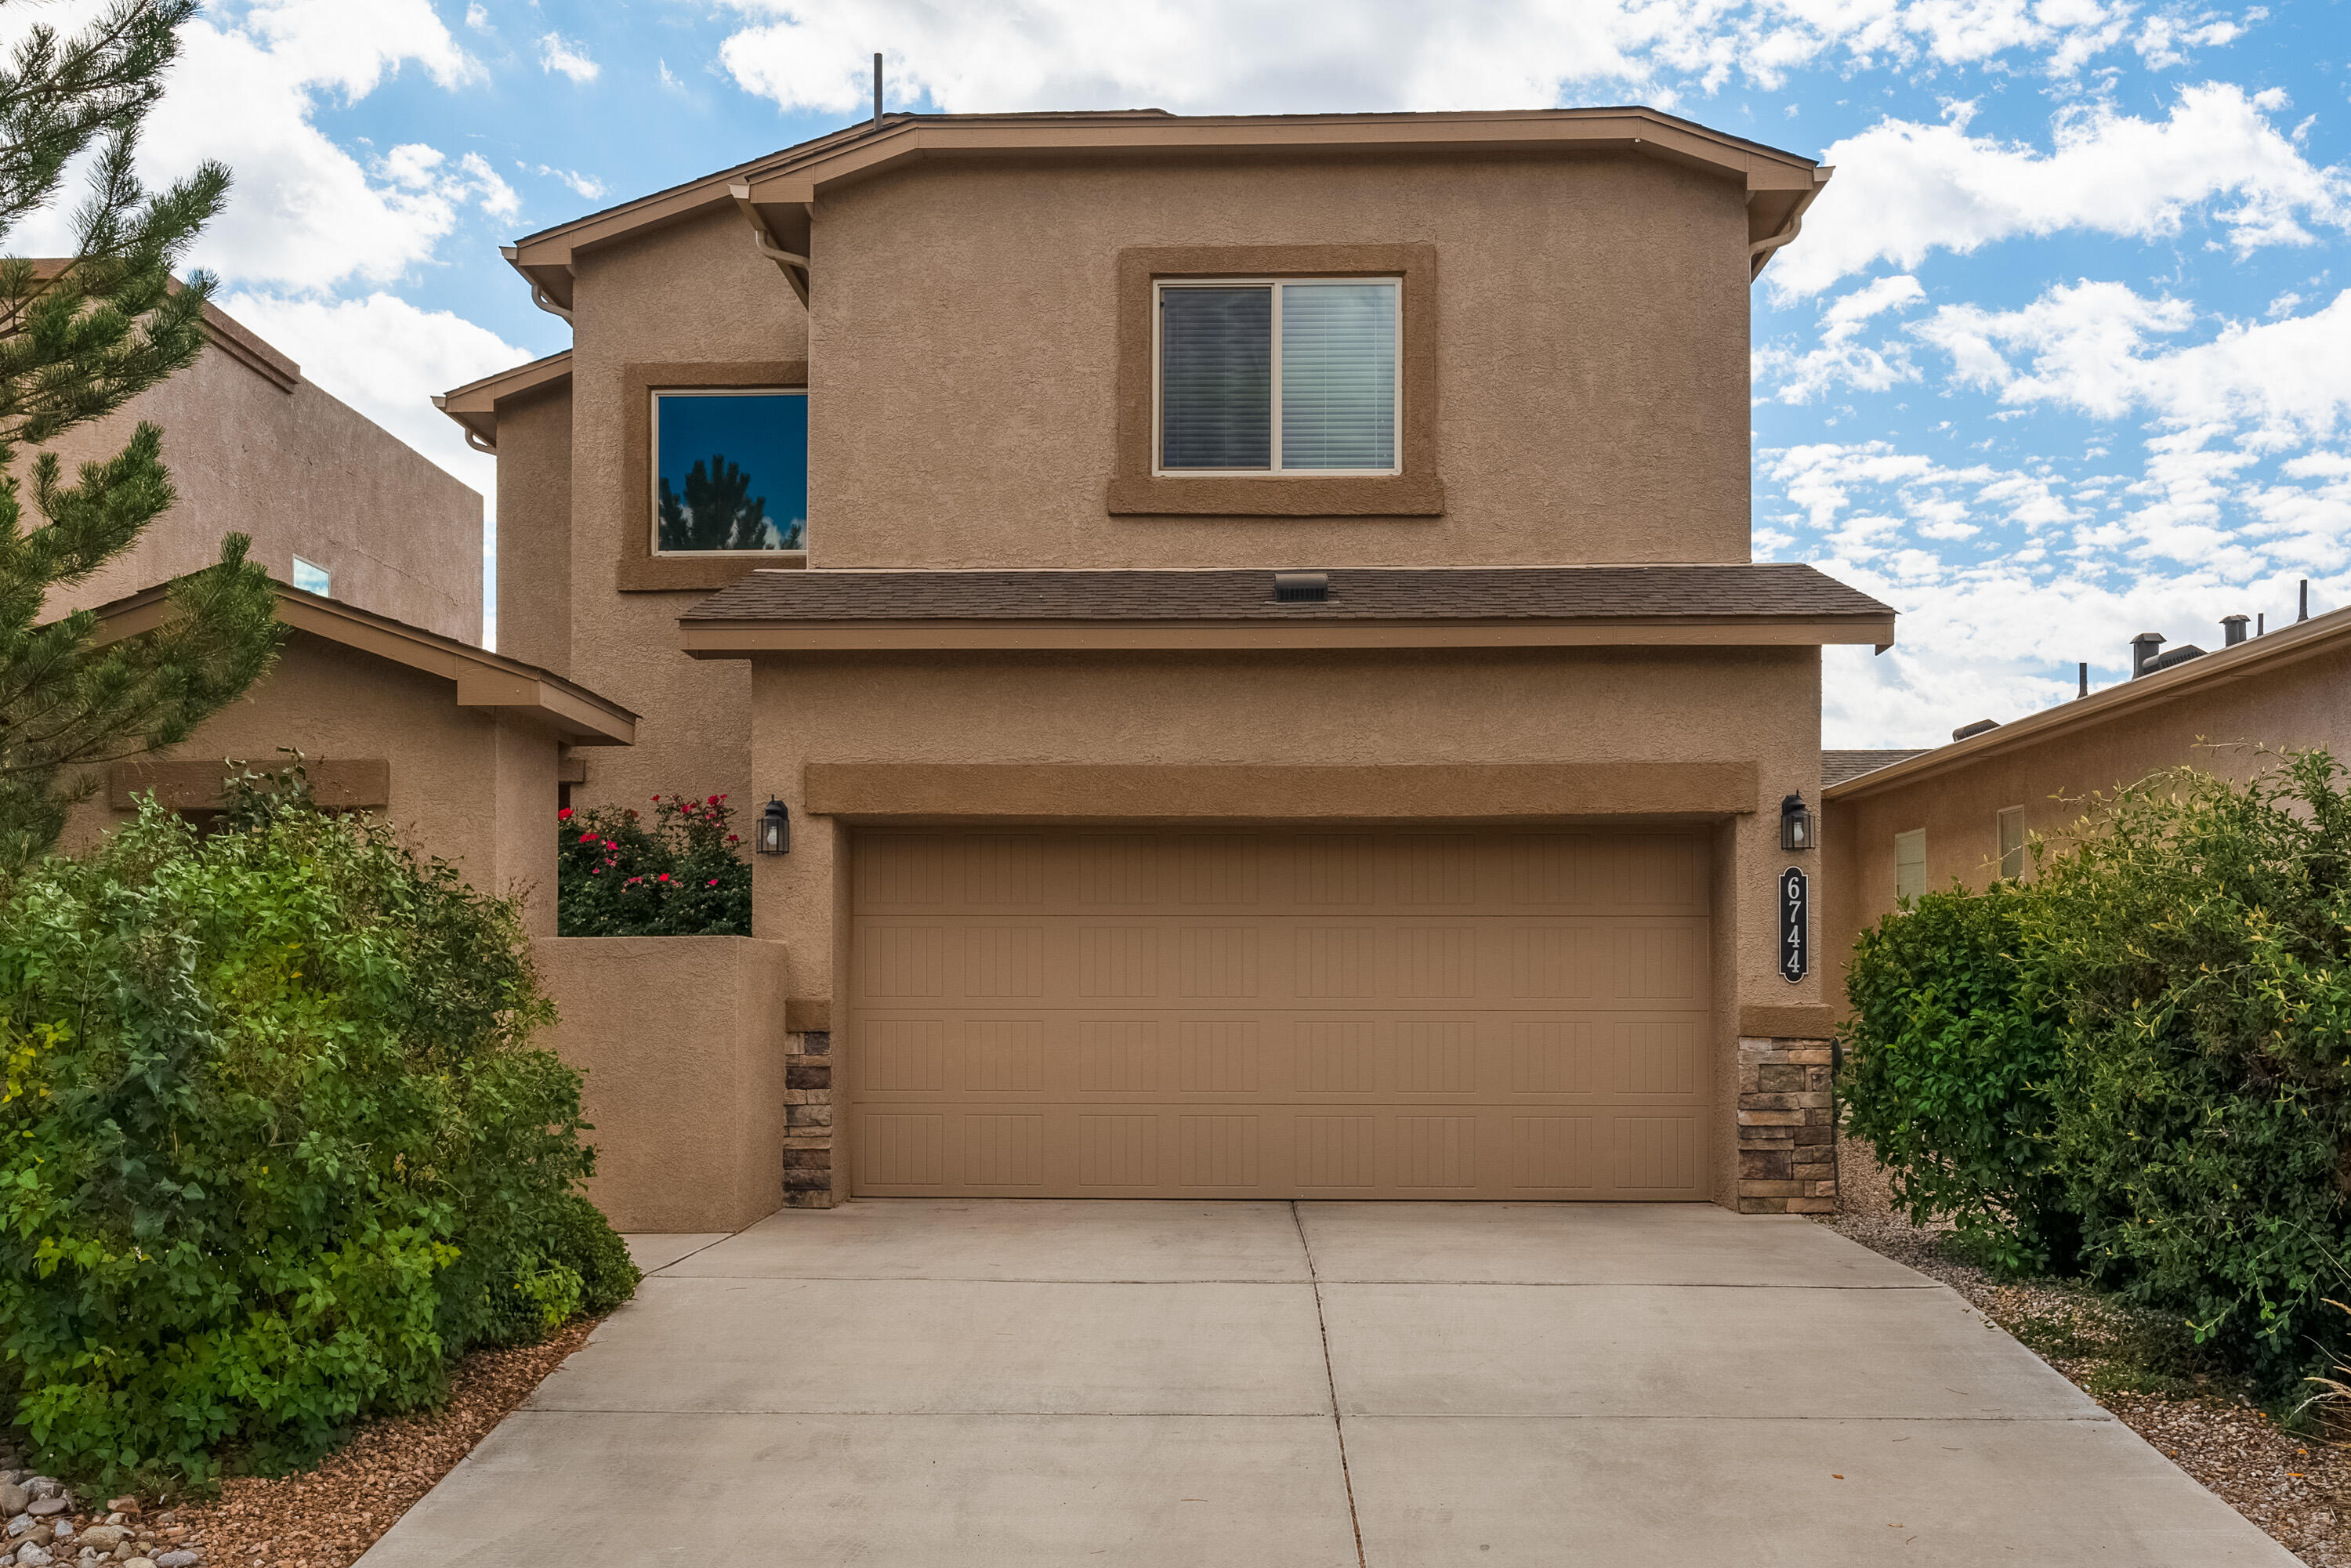 Come check out this stunning 2 story home in The Trails neighborhood. All bedrooms are located upstairs, including laundry. Sit outback and enjoy the beautiful backyard and covered patio!House has easy access to Paseo Del Norte.